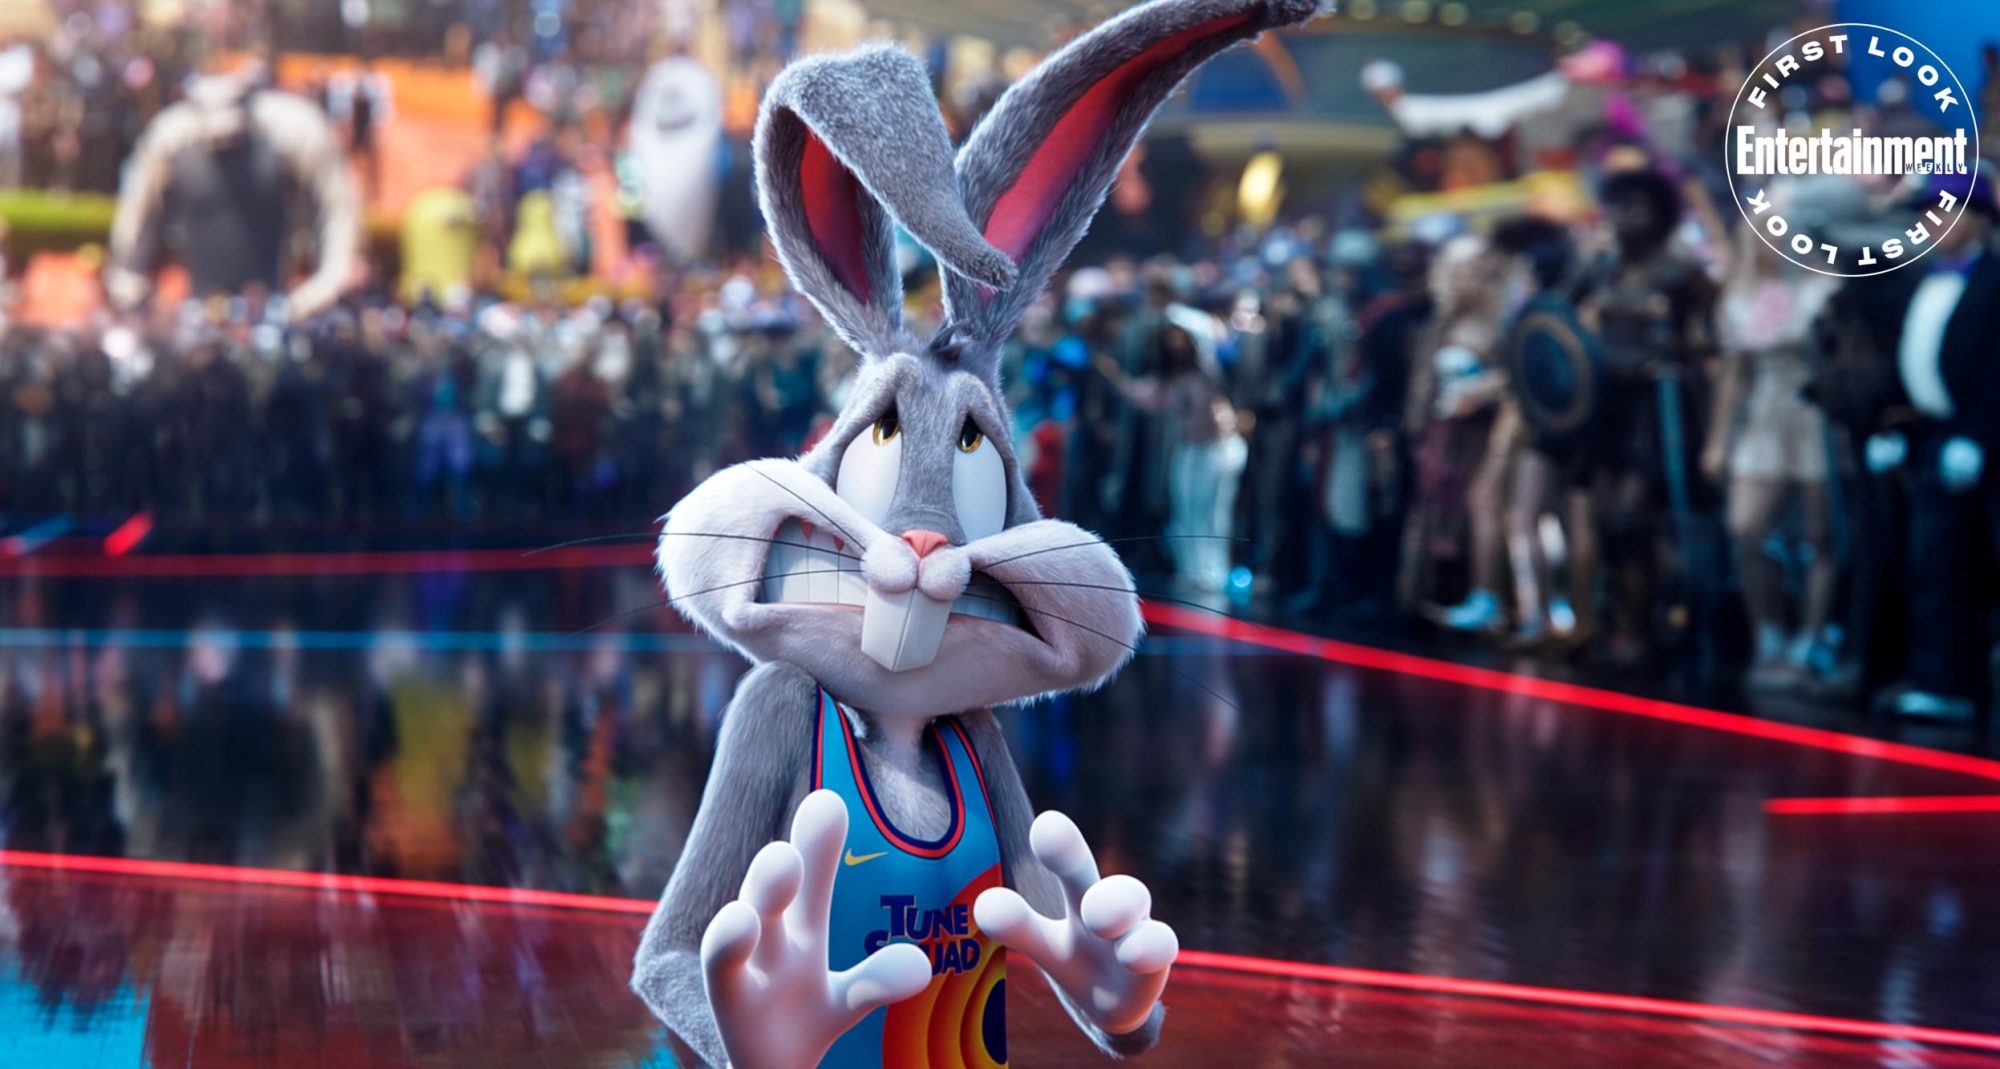 Space Jam: A New Legacy screenshot: Bugs Bunny surrounded by many cartoon characters